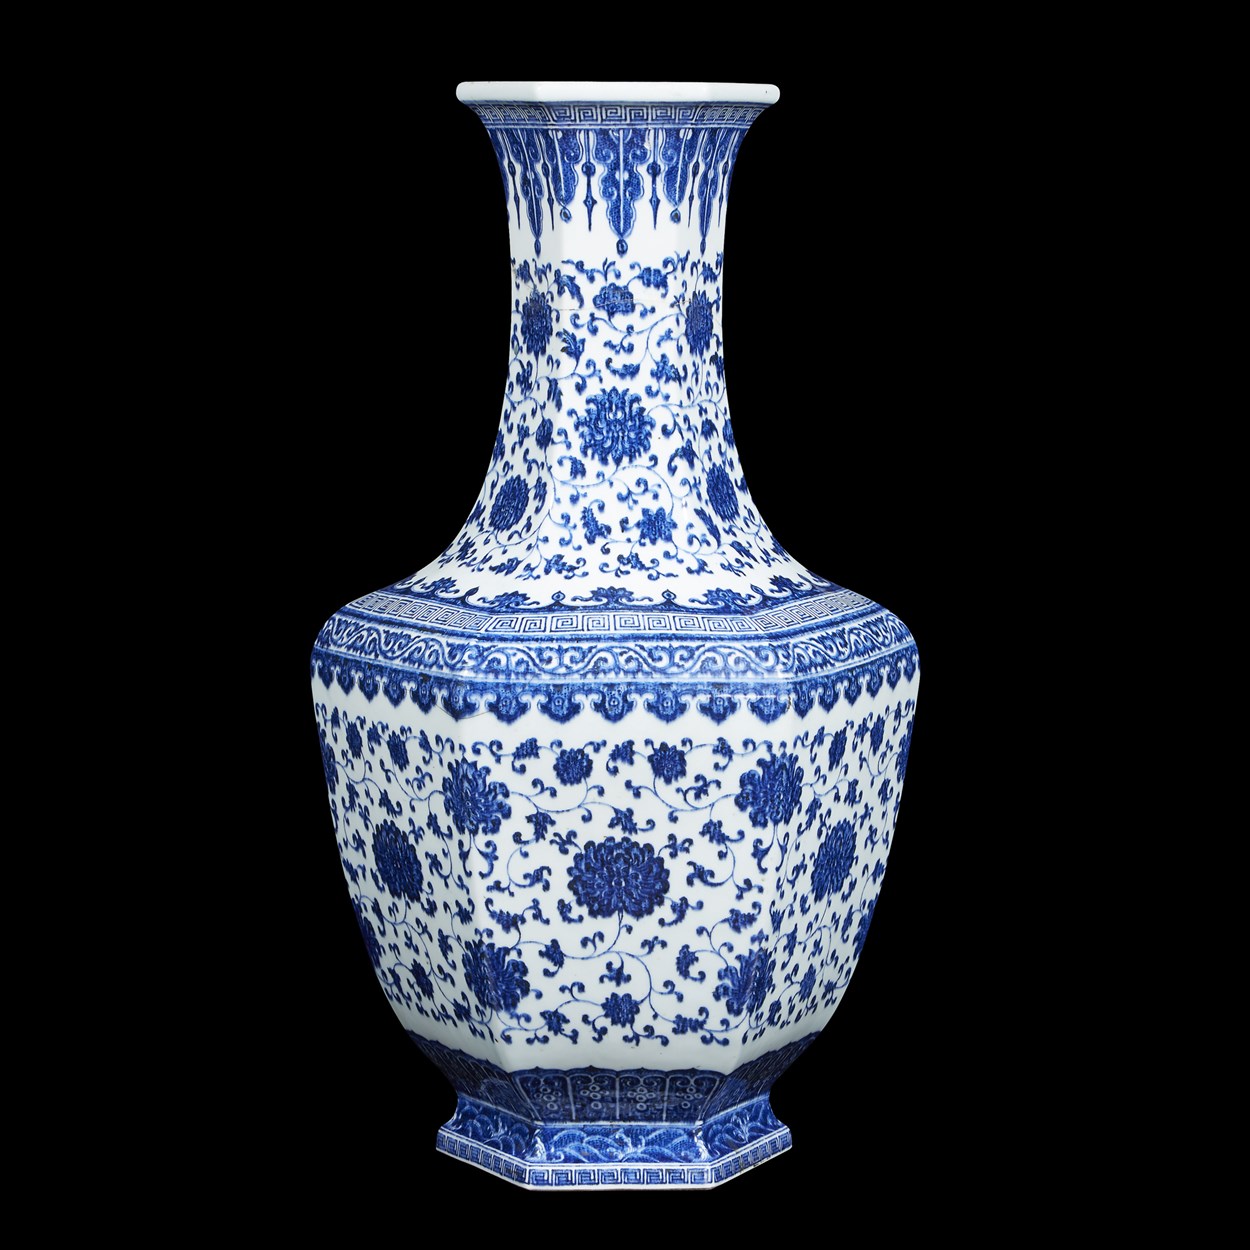 Lot 287 - A rare and impressive Chinese blue and white porcelain hexagonal vase